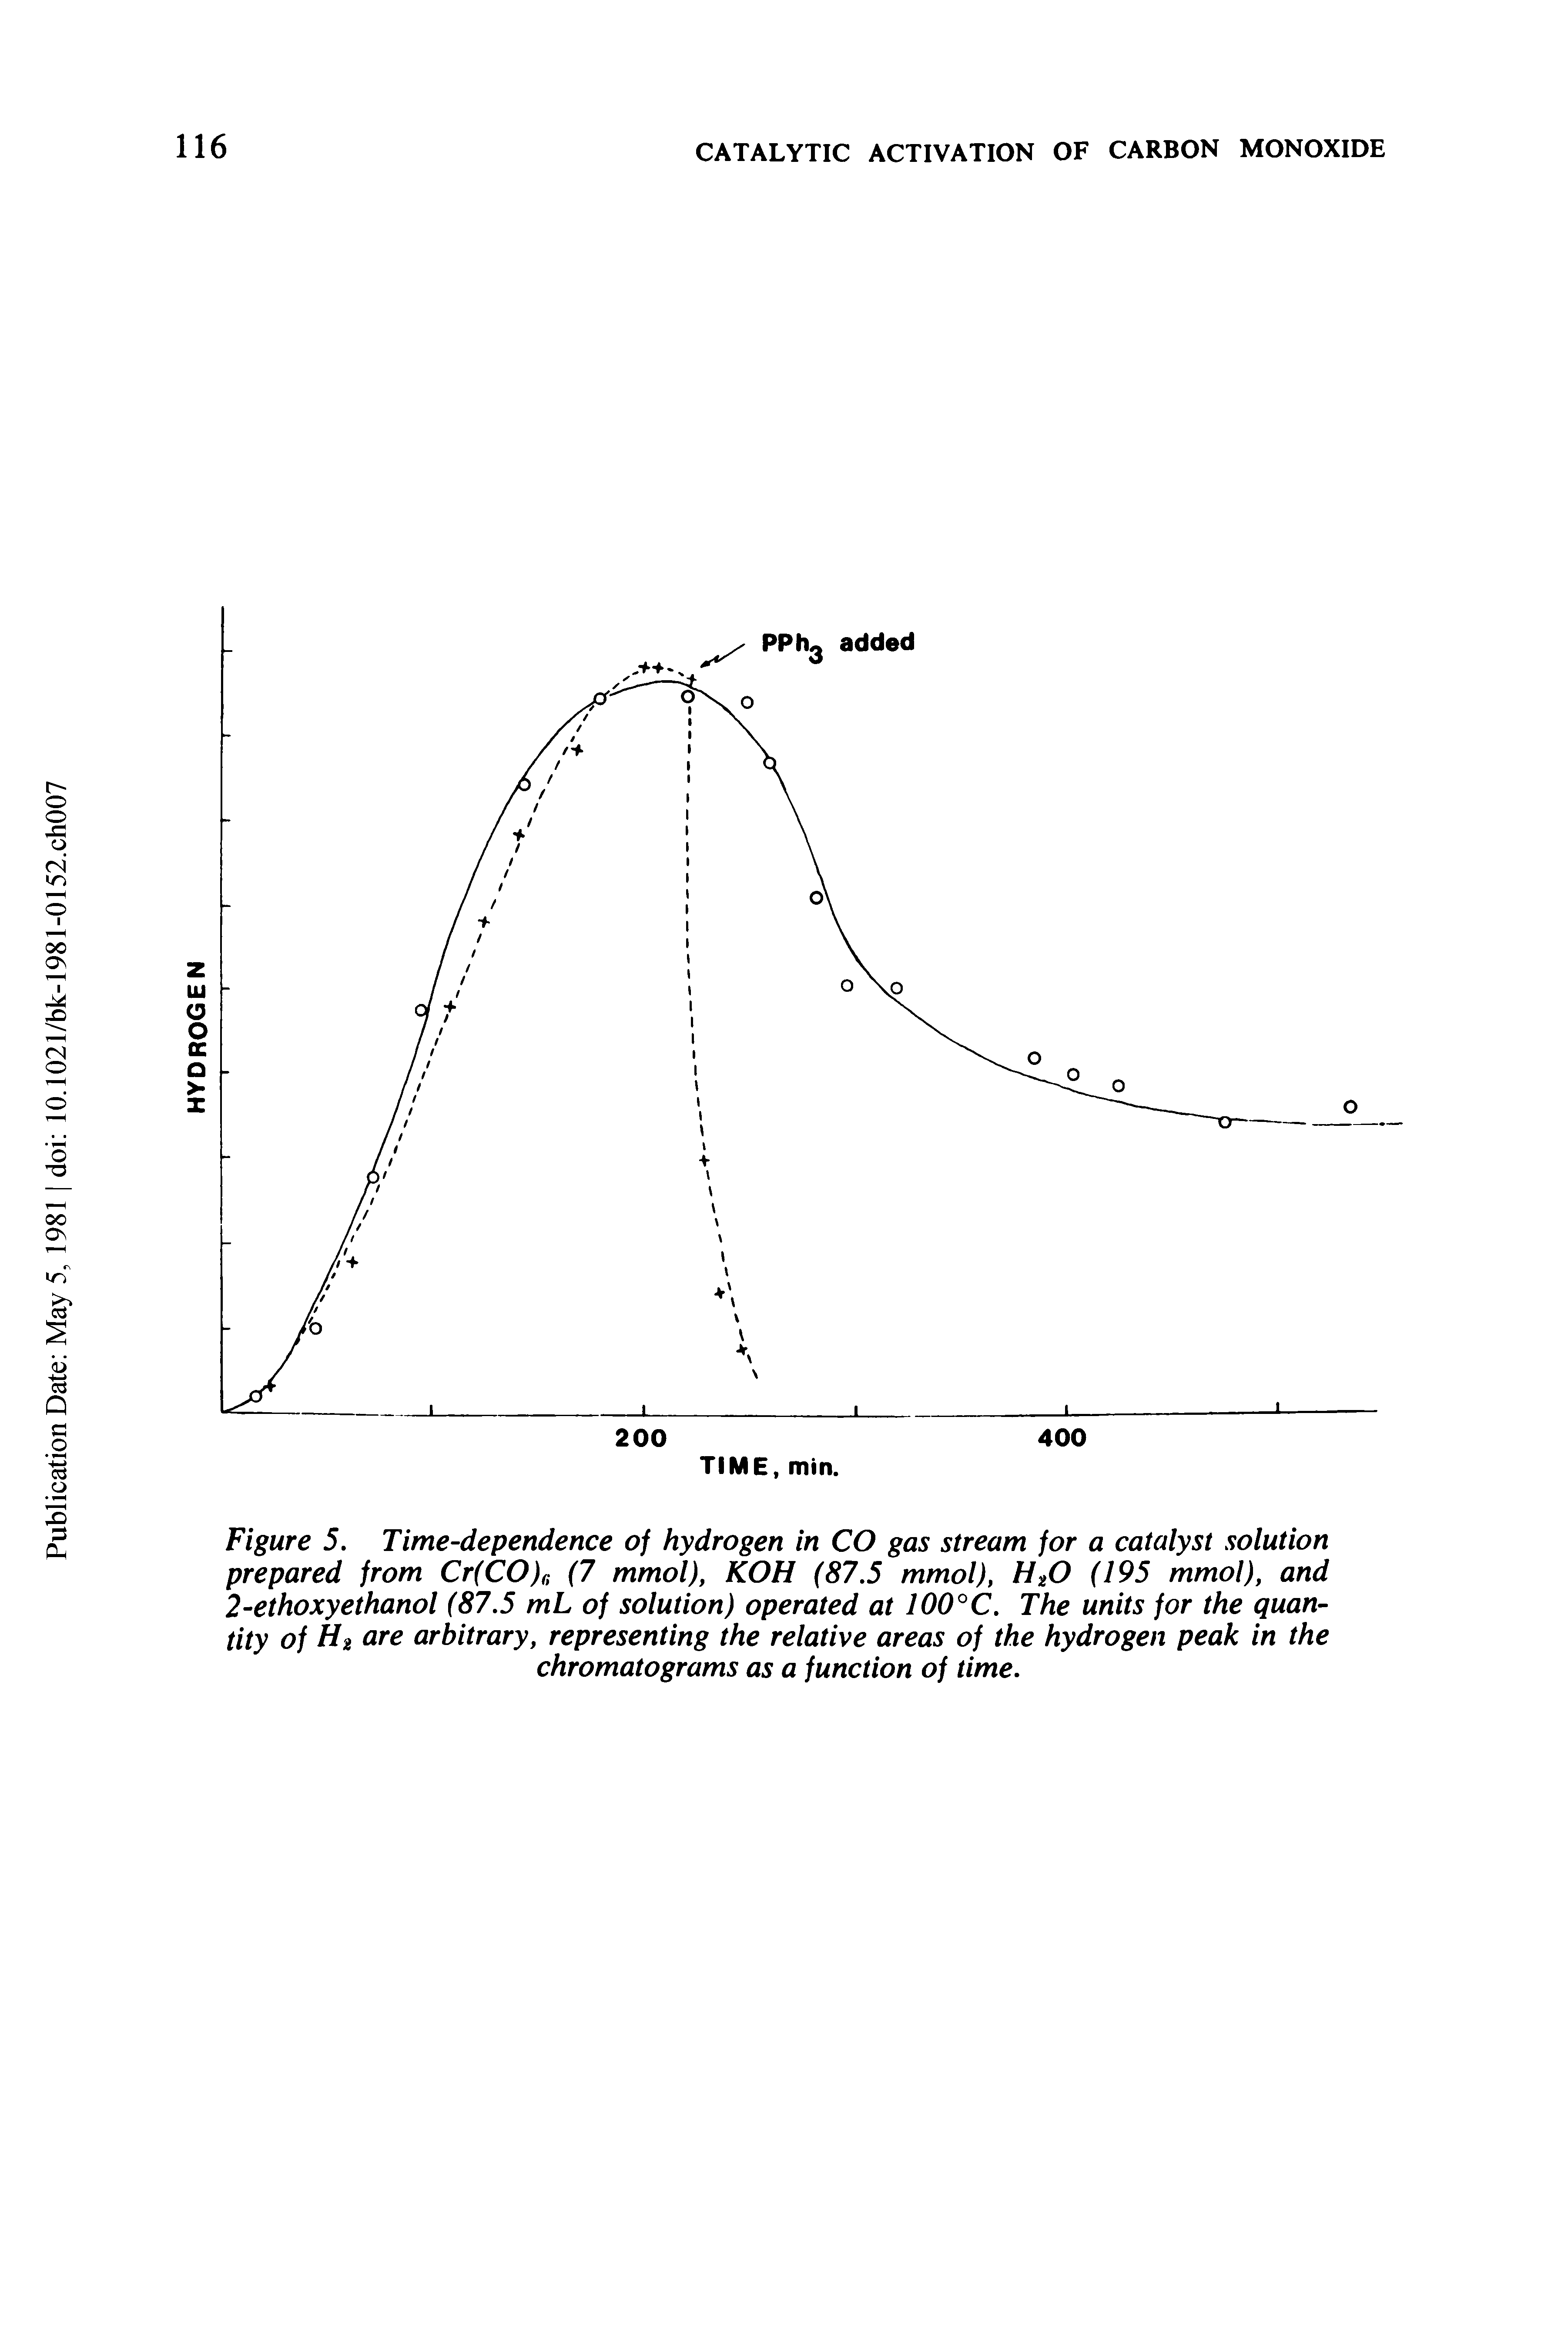 Figure 5. Time-dependence of hydrogen in CO gas stream for a catalyst solution prepared from Cr(CO)r, (7 mmol), KOH (87.5 mmol), H20 (195 mmol), and 2-ethoxyethanol (87.5 mL of solution) operated at 100°C. The units for the quantity of H2 are arbitrary, representing the relative areas of the hydrogen peak in the chromatograms as a function of time.